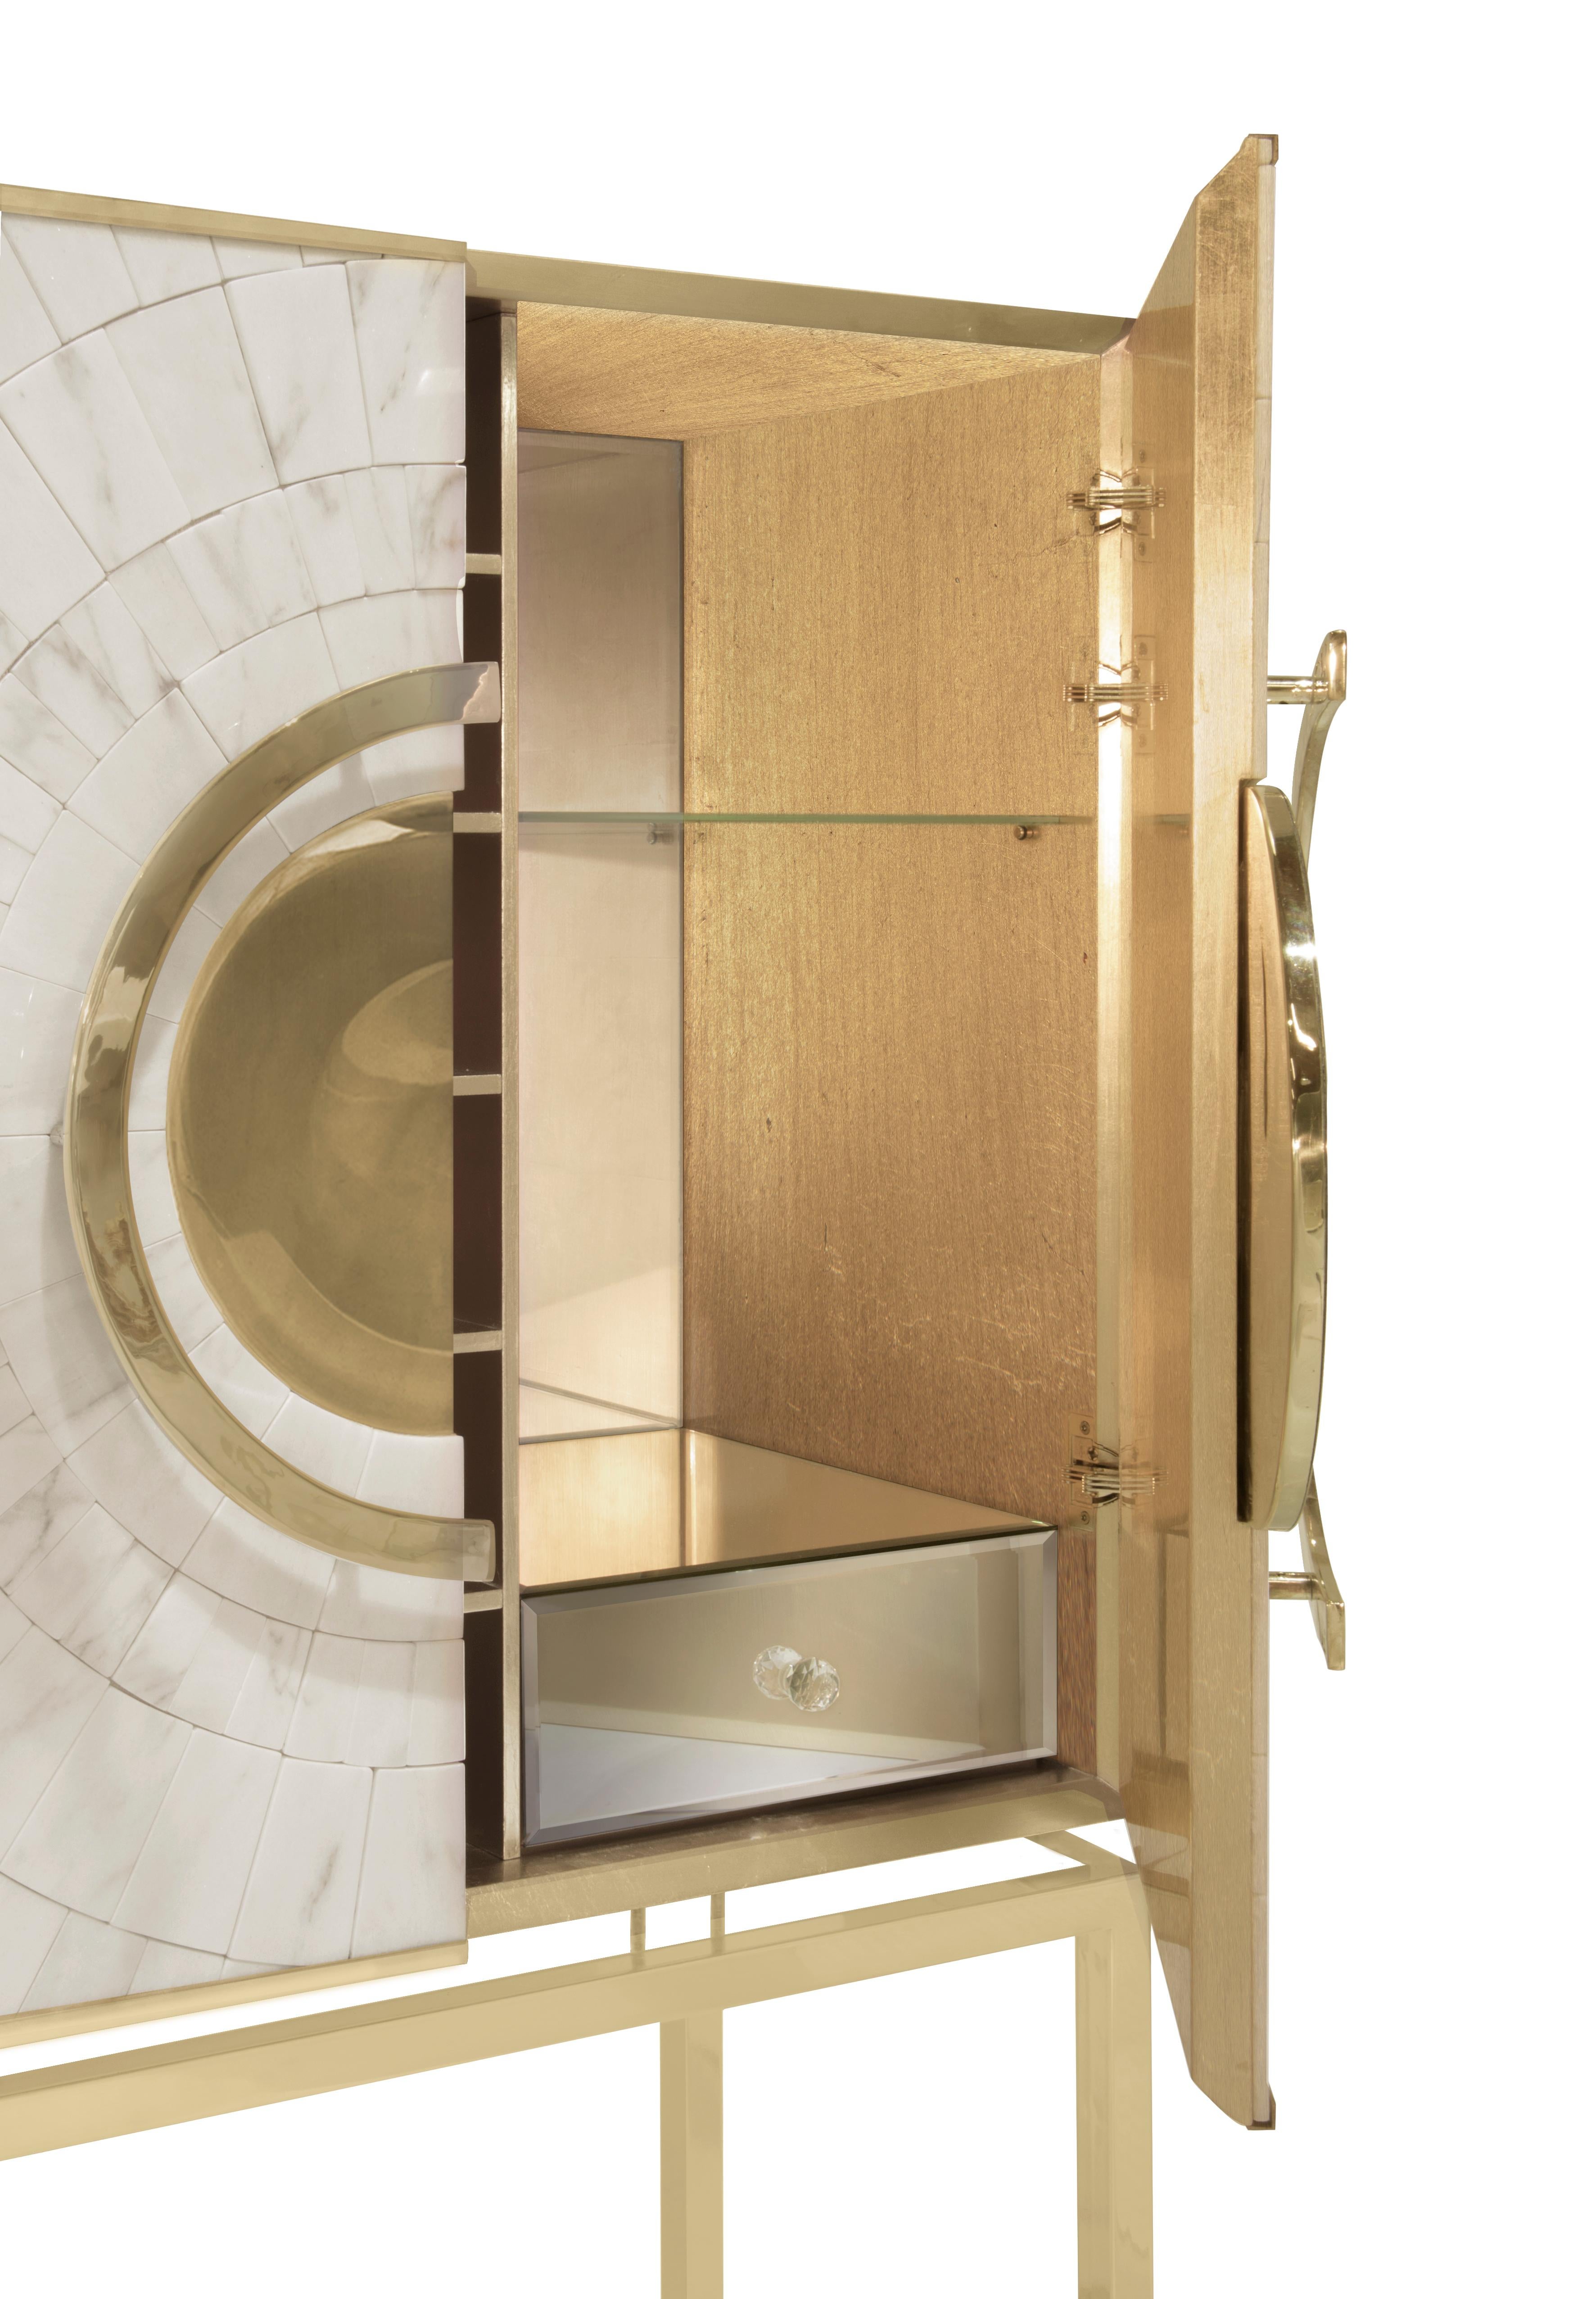 Secret Bar Cabinet by Memoir Essence
Dimensions: D 50 x W 90 x H 165 cm.
Materials: Brushed brass, gold leaf and white marble.

Also available in brushed brass and polished stainless steel. Please contact us.

With a sophisticated and timeless